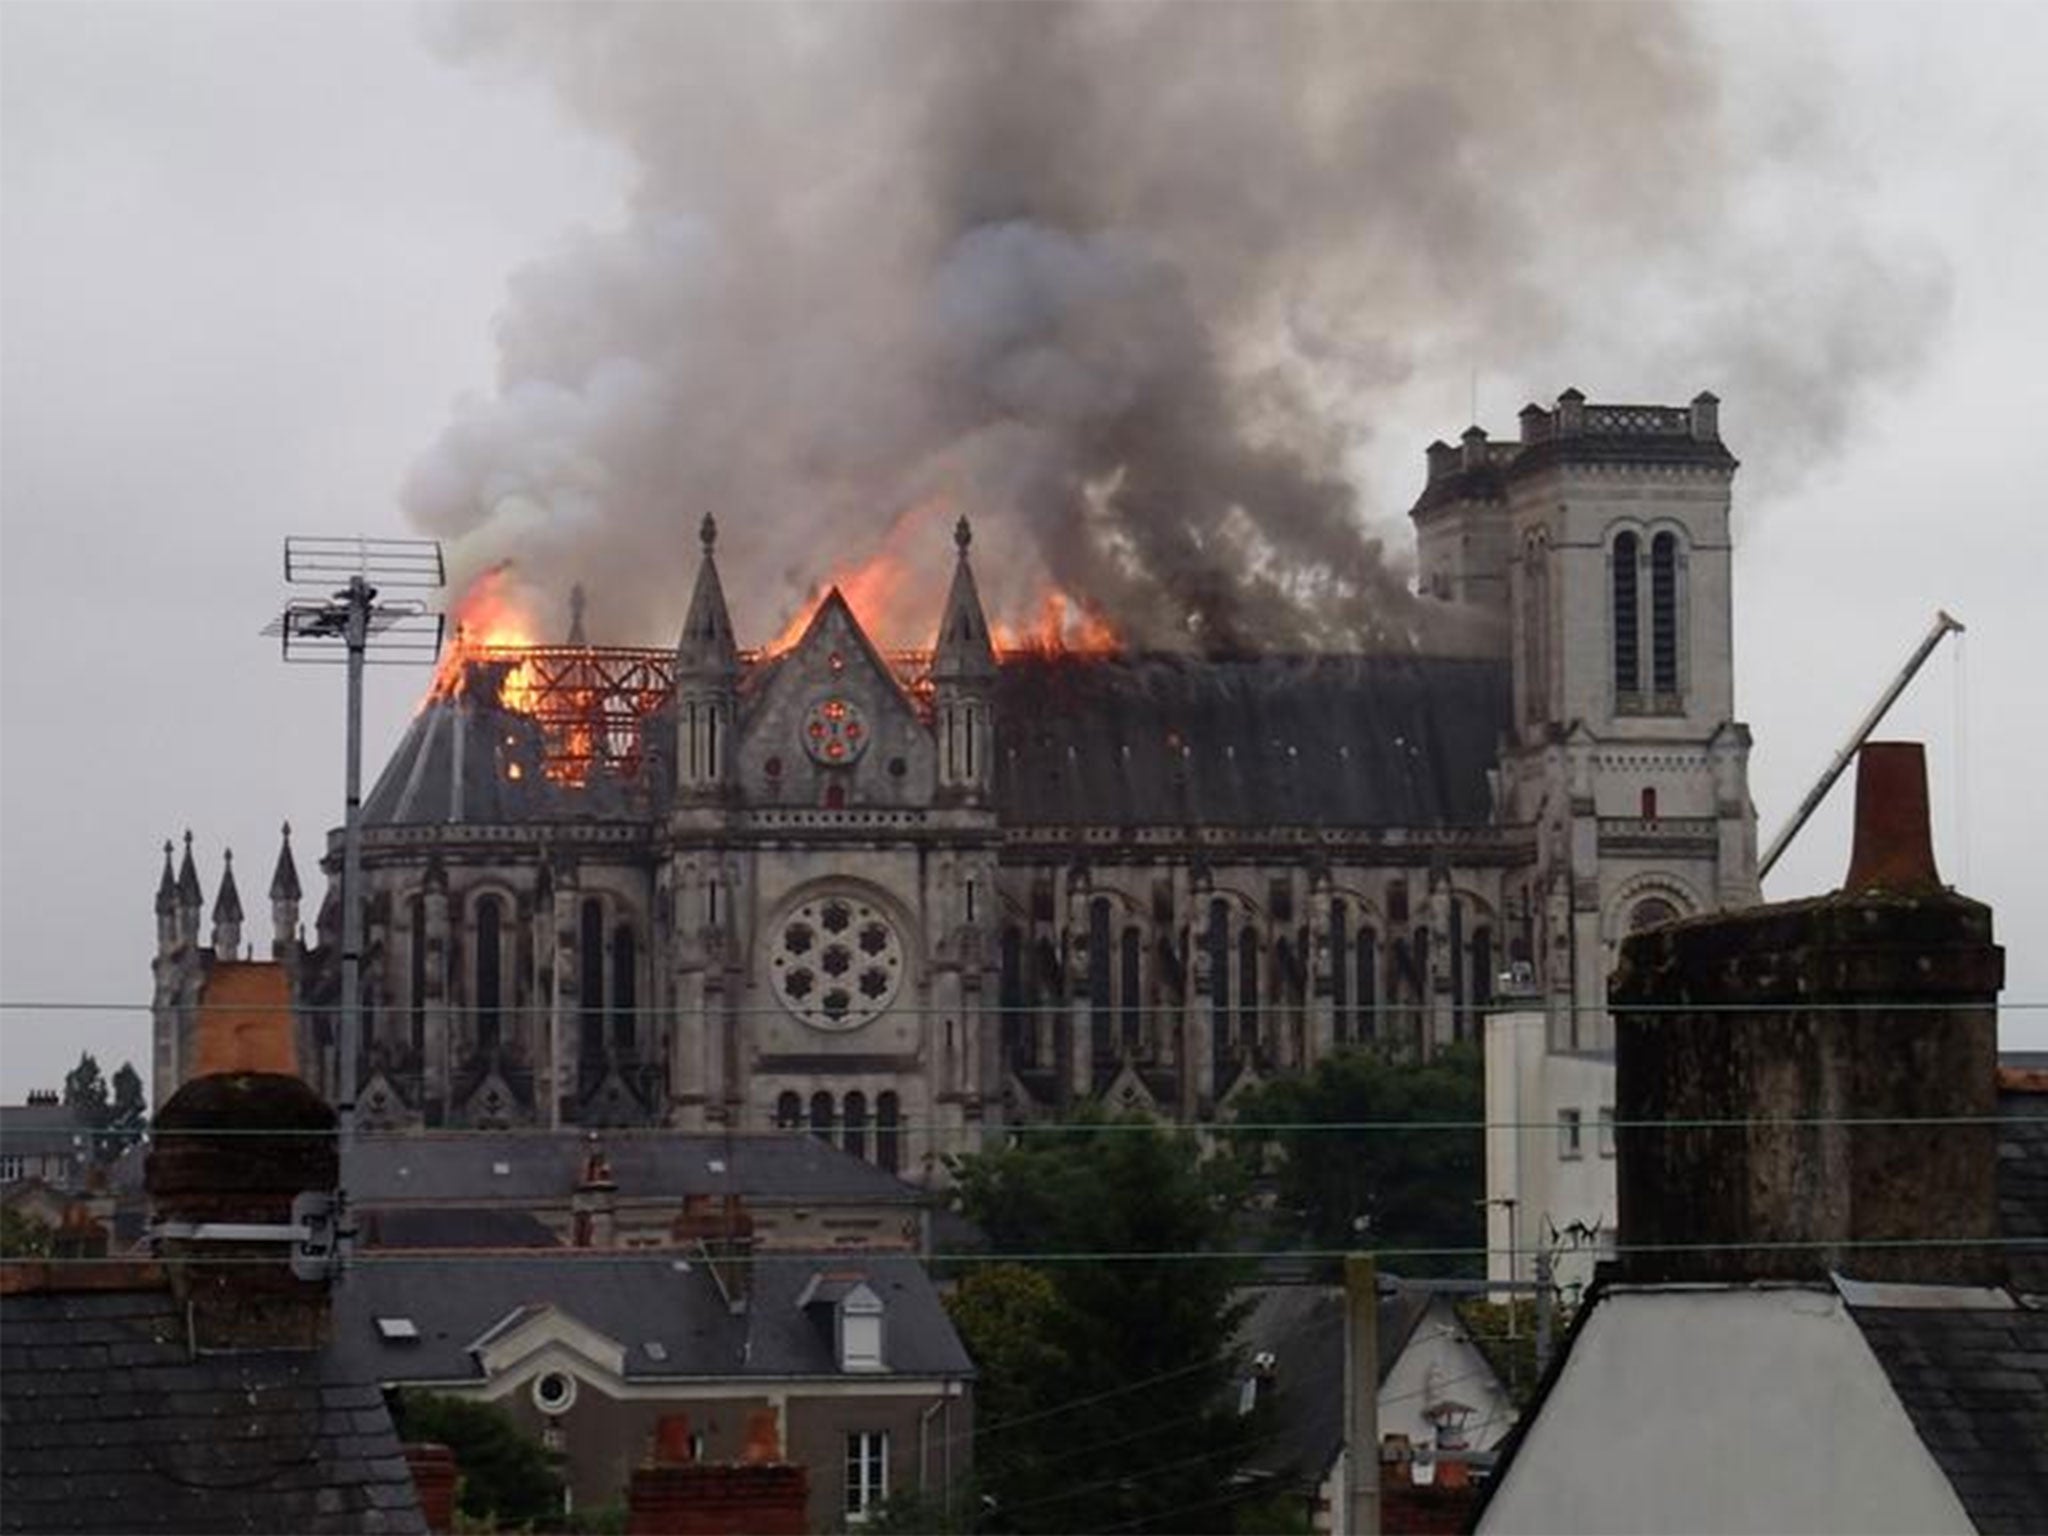 Photos uploaded to social media show the roof of the 19th century basilica burning (credit: Maxime Claval/ Twitter)